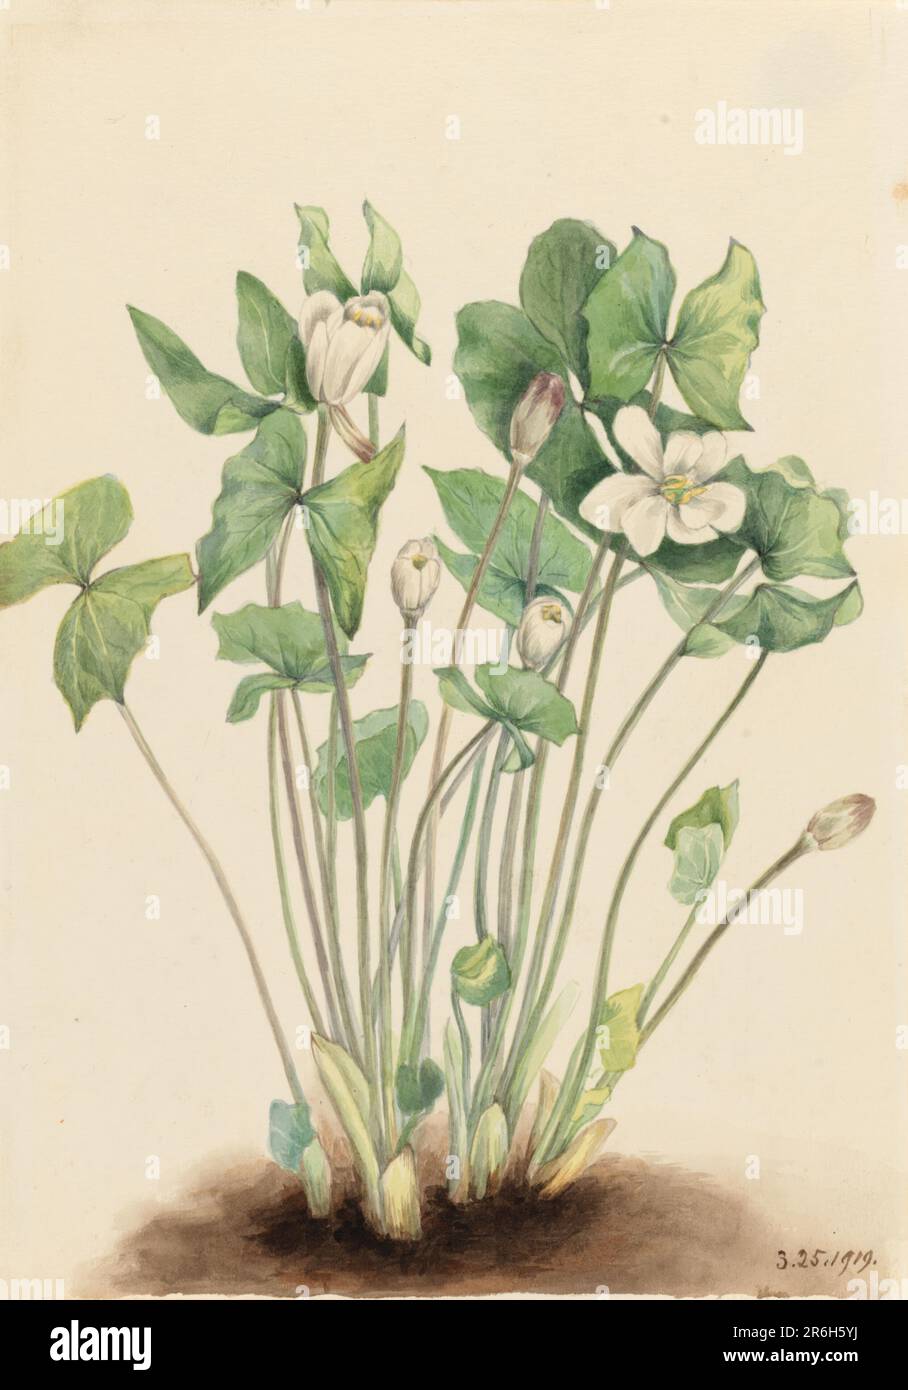 Twinleaf (Jeffersonia diphylla). Date: 1919. Watercolor on paper. Museum: Smithsonian American Art Museum. Stock Photo